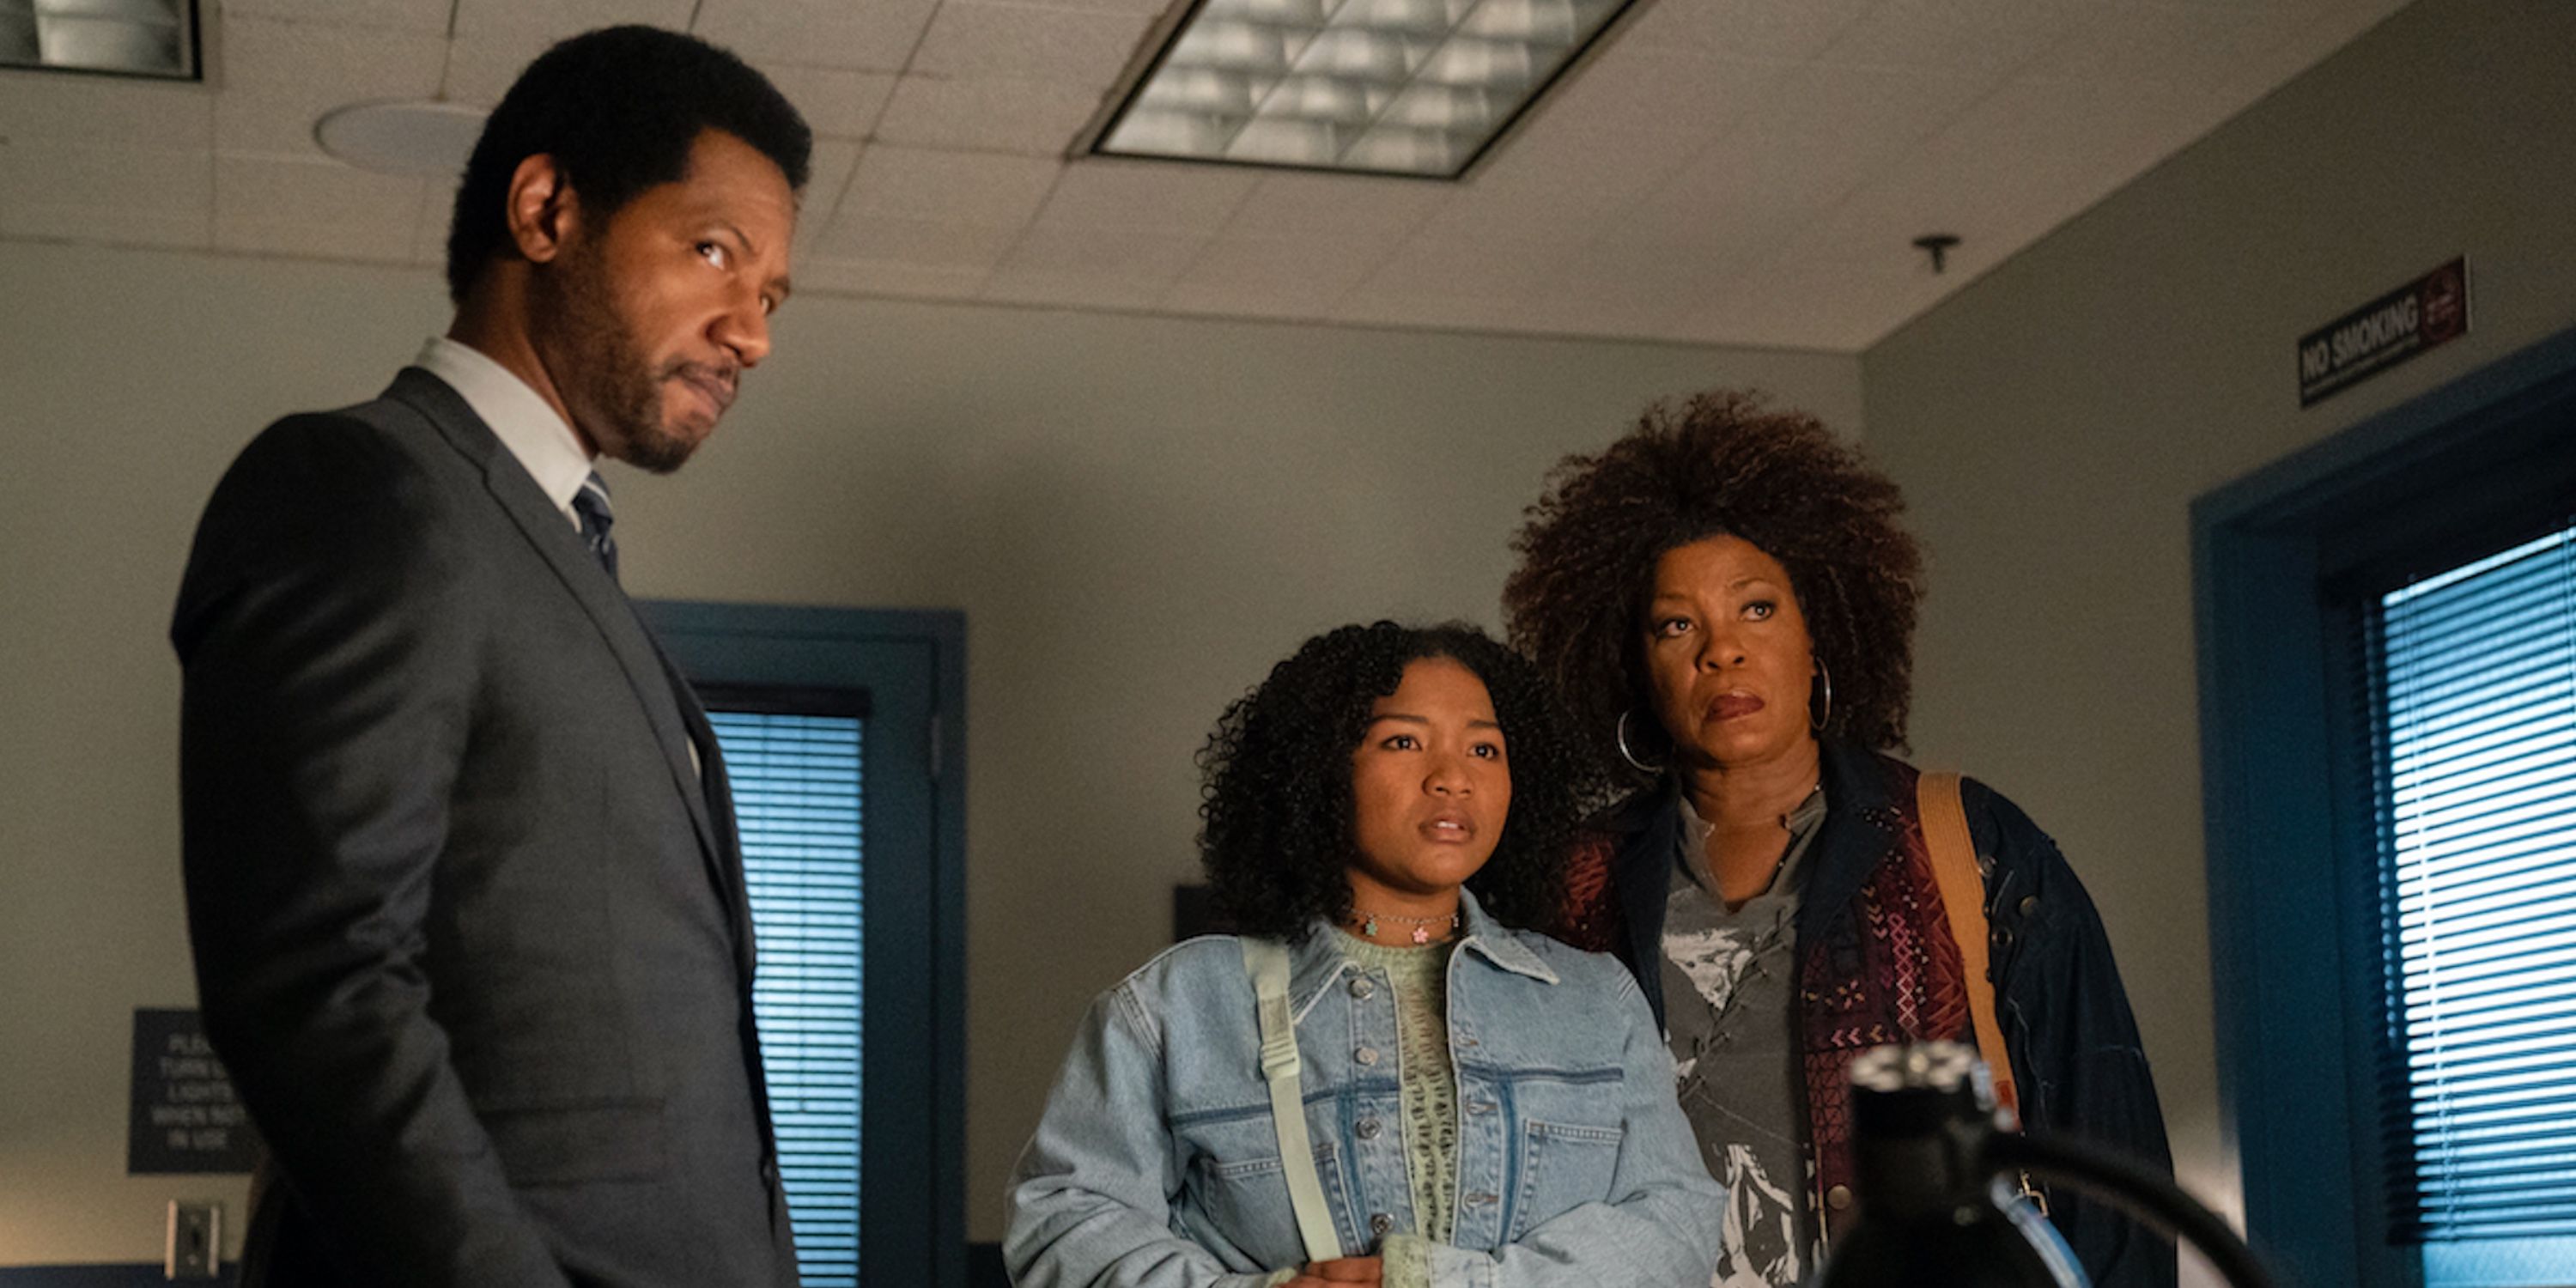 Tory Kittles as Marcus Dante, Laya DeLeon Hayes as Delilah McCall, and Lorraine Toussaint as Viola &quot;Aunt Vi&quot; Marsette in The Equalizer on CBS